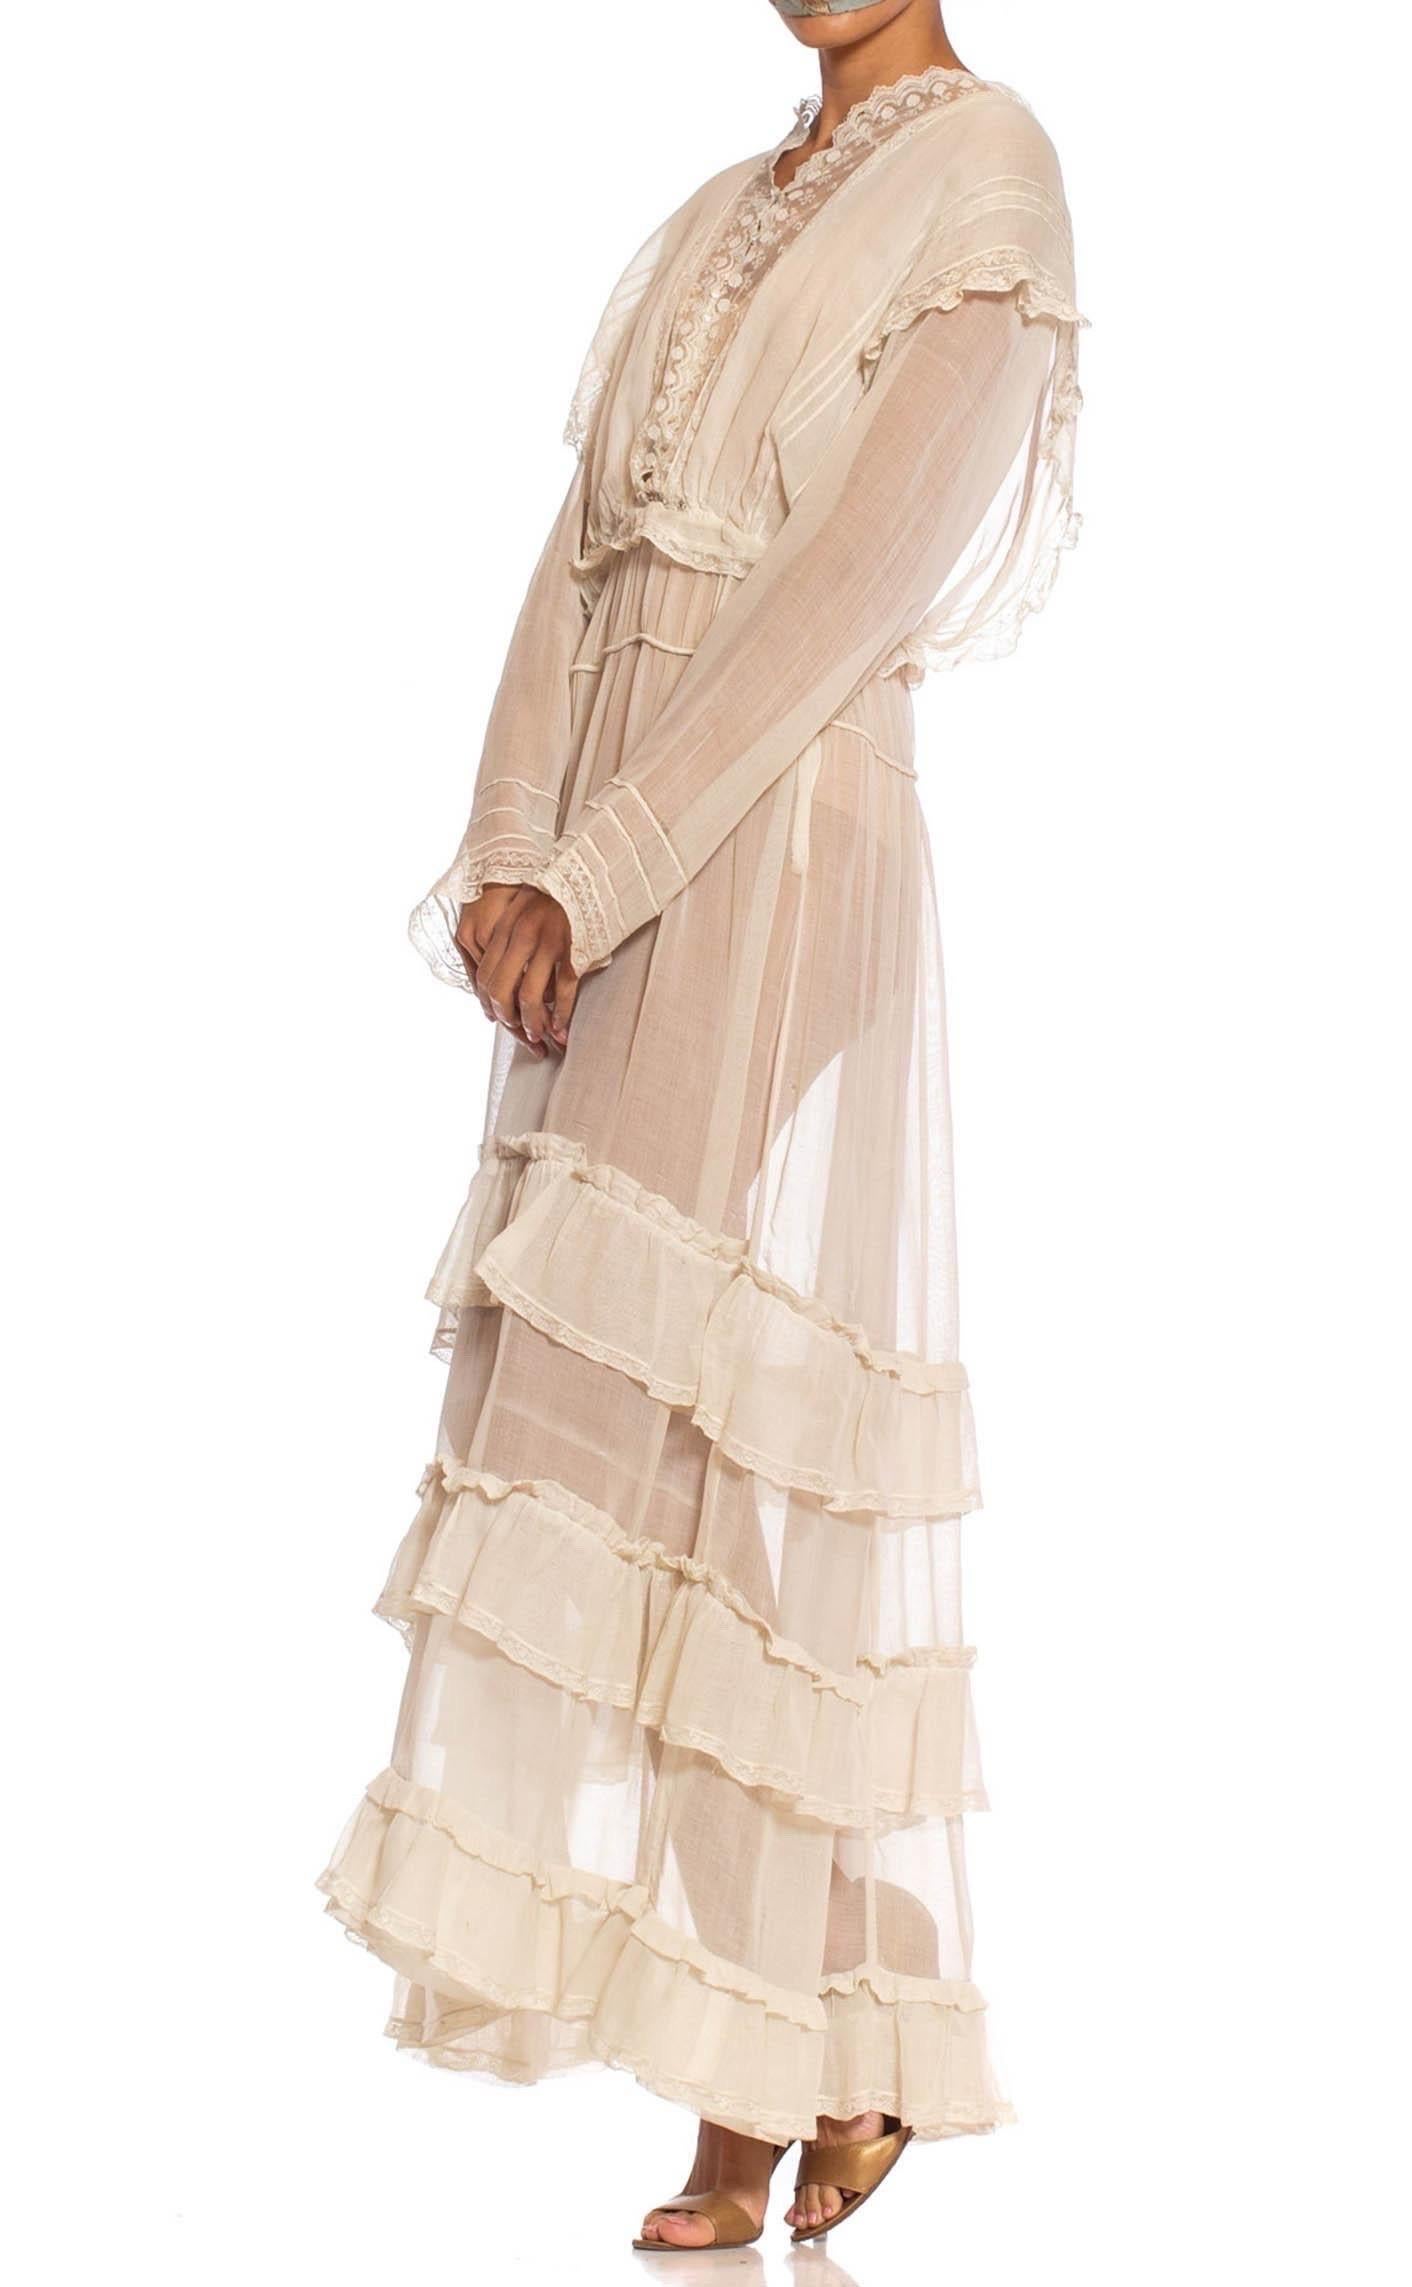 Edwardian Off White Organic Cotton Voile & Lace Long Sleeved Ruffled Tea Dress For Sale 6